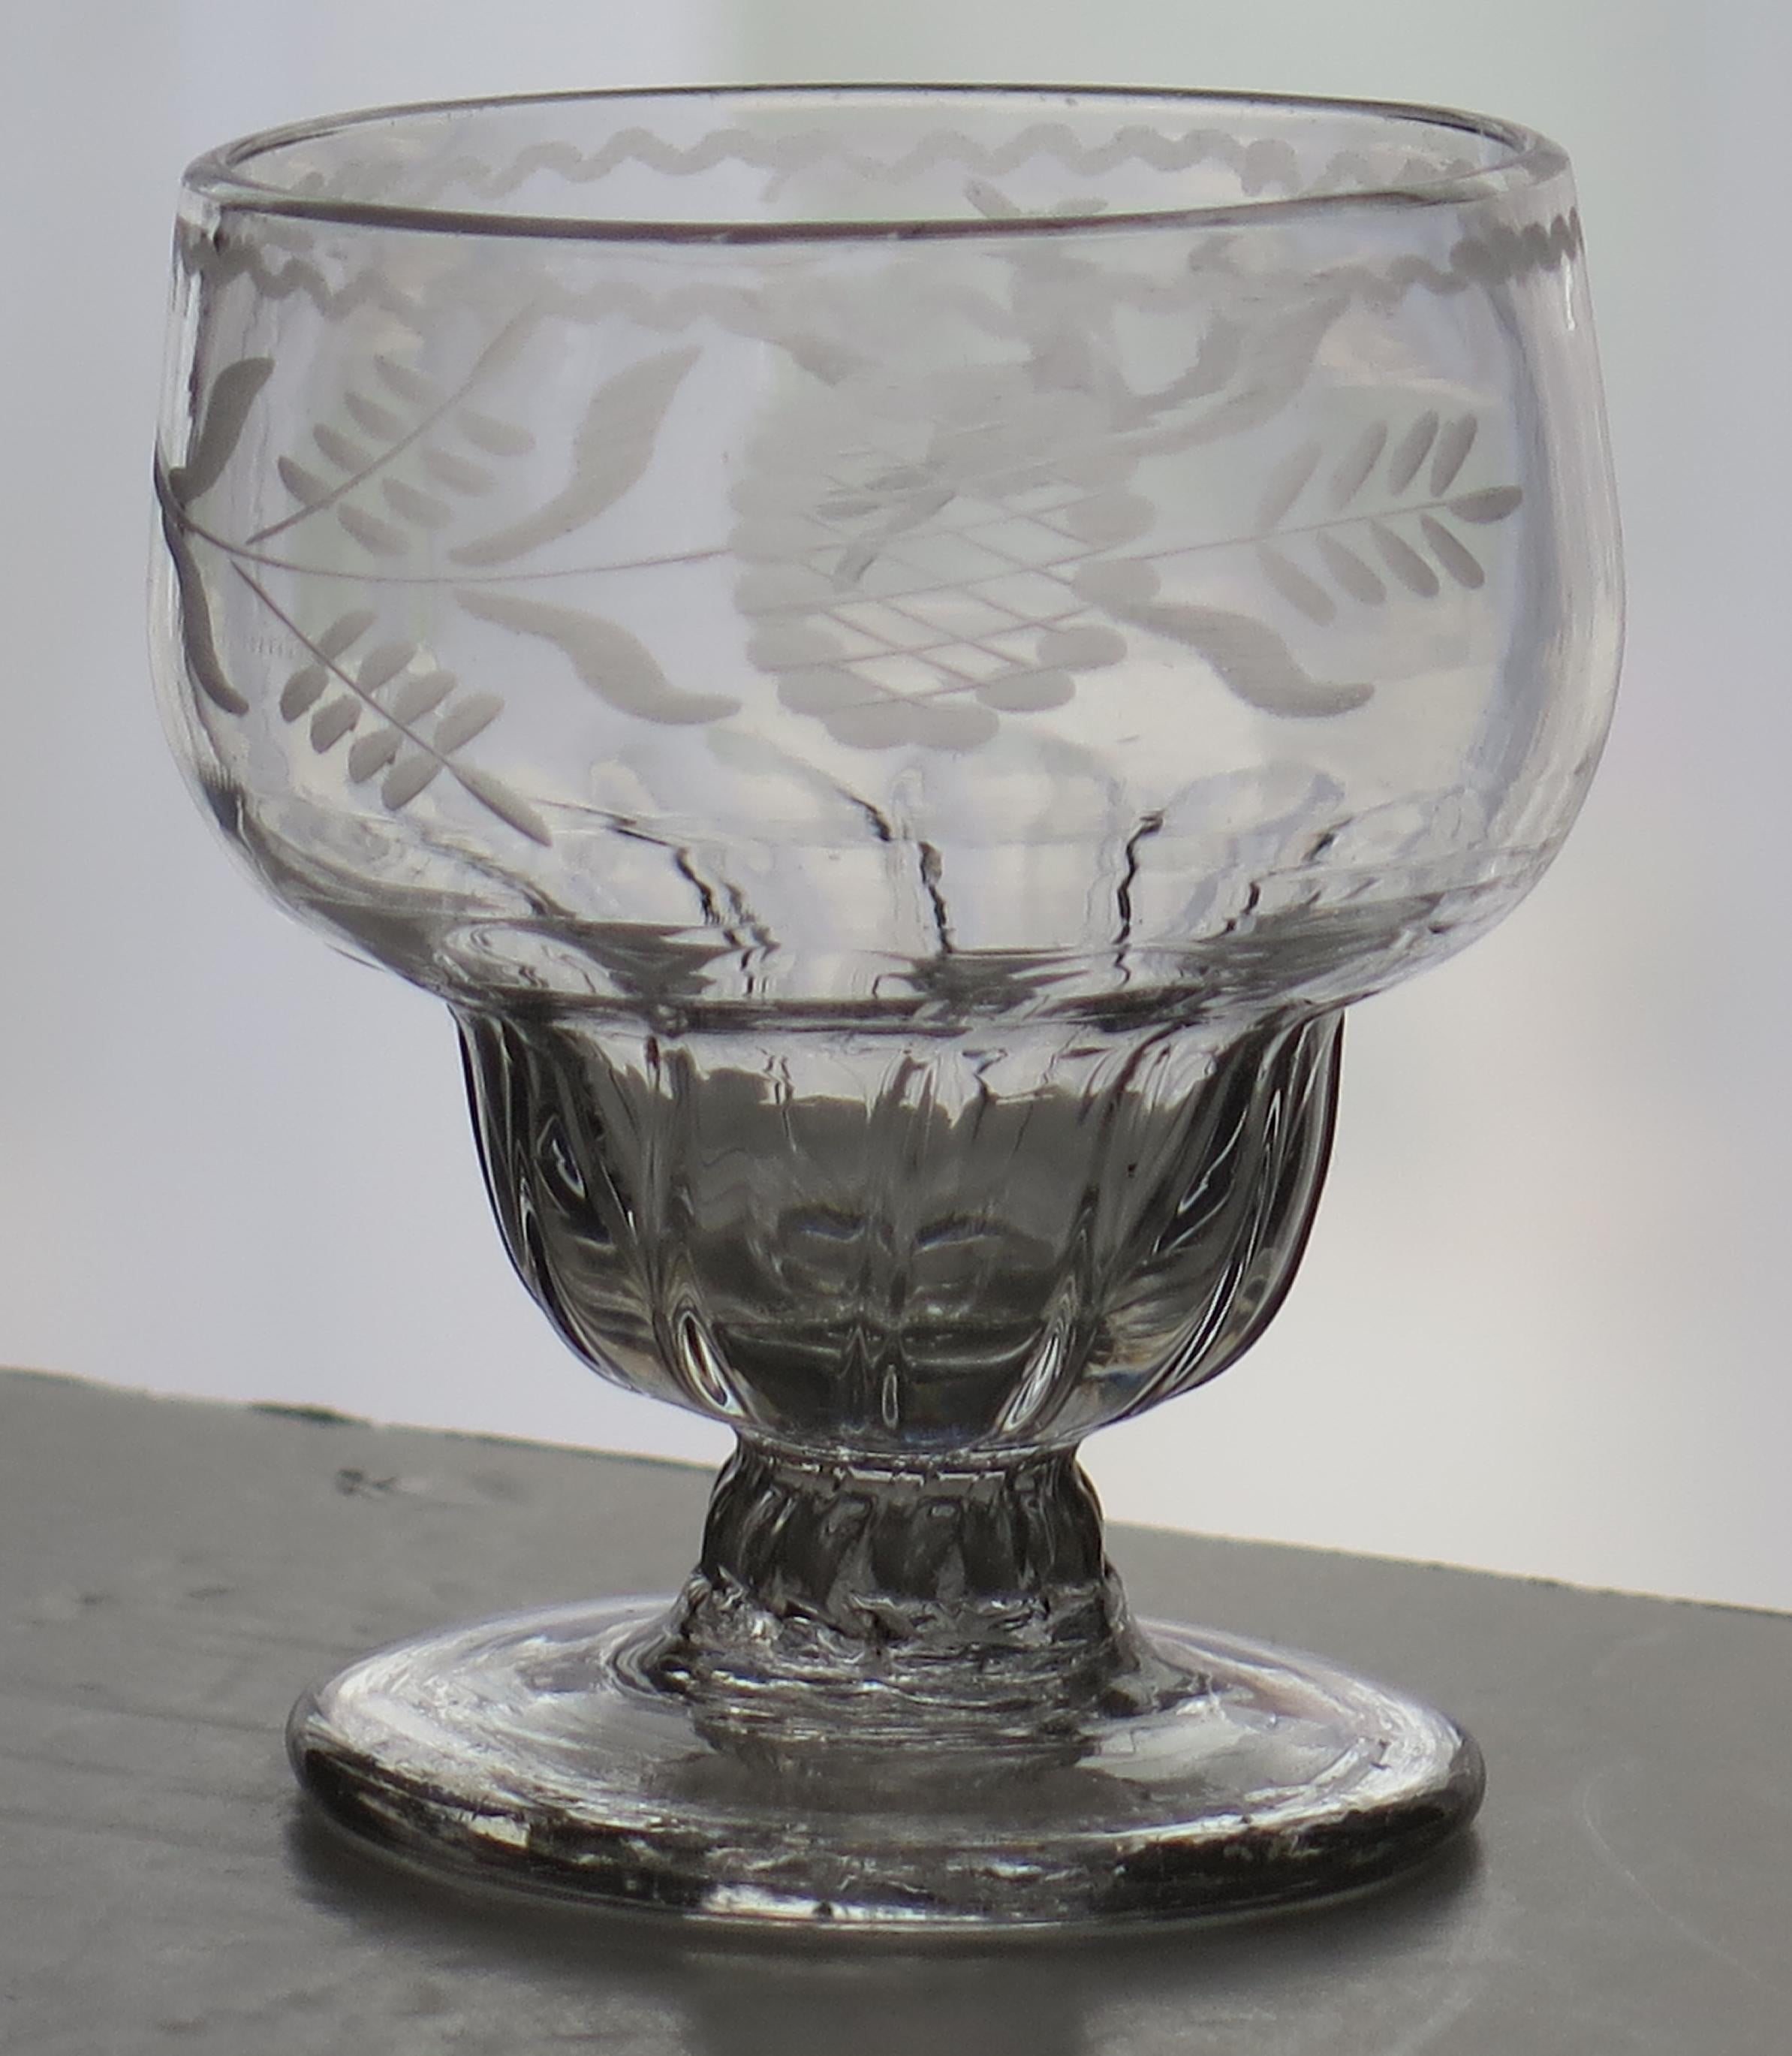 This is a very good hand-blown, English, mid-Georgian, Monteith or Bonnet Glass, dating from the middle of the 18th century, circa 1750.

It is made from English lead glass which is relatively heavy and has a soft grey colour.

The Cup bowl is